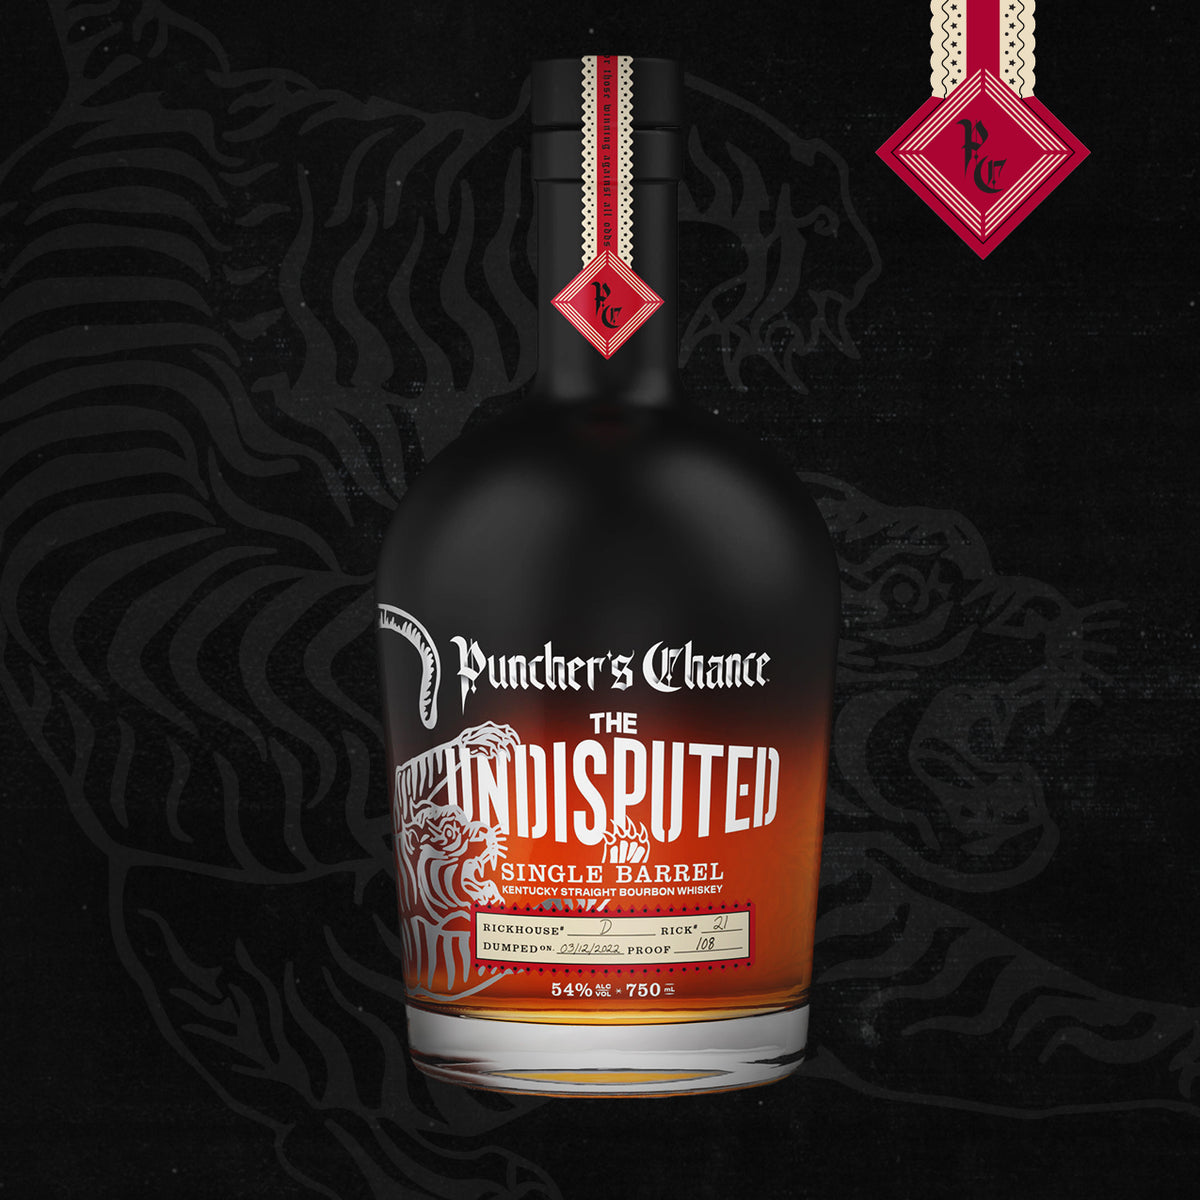 Puncher’s Chance Bourbon: The UNDISPUTED